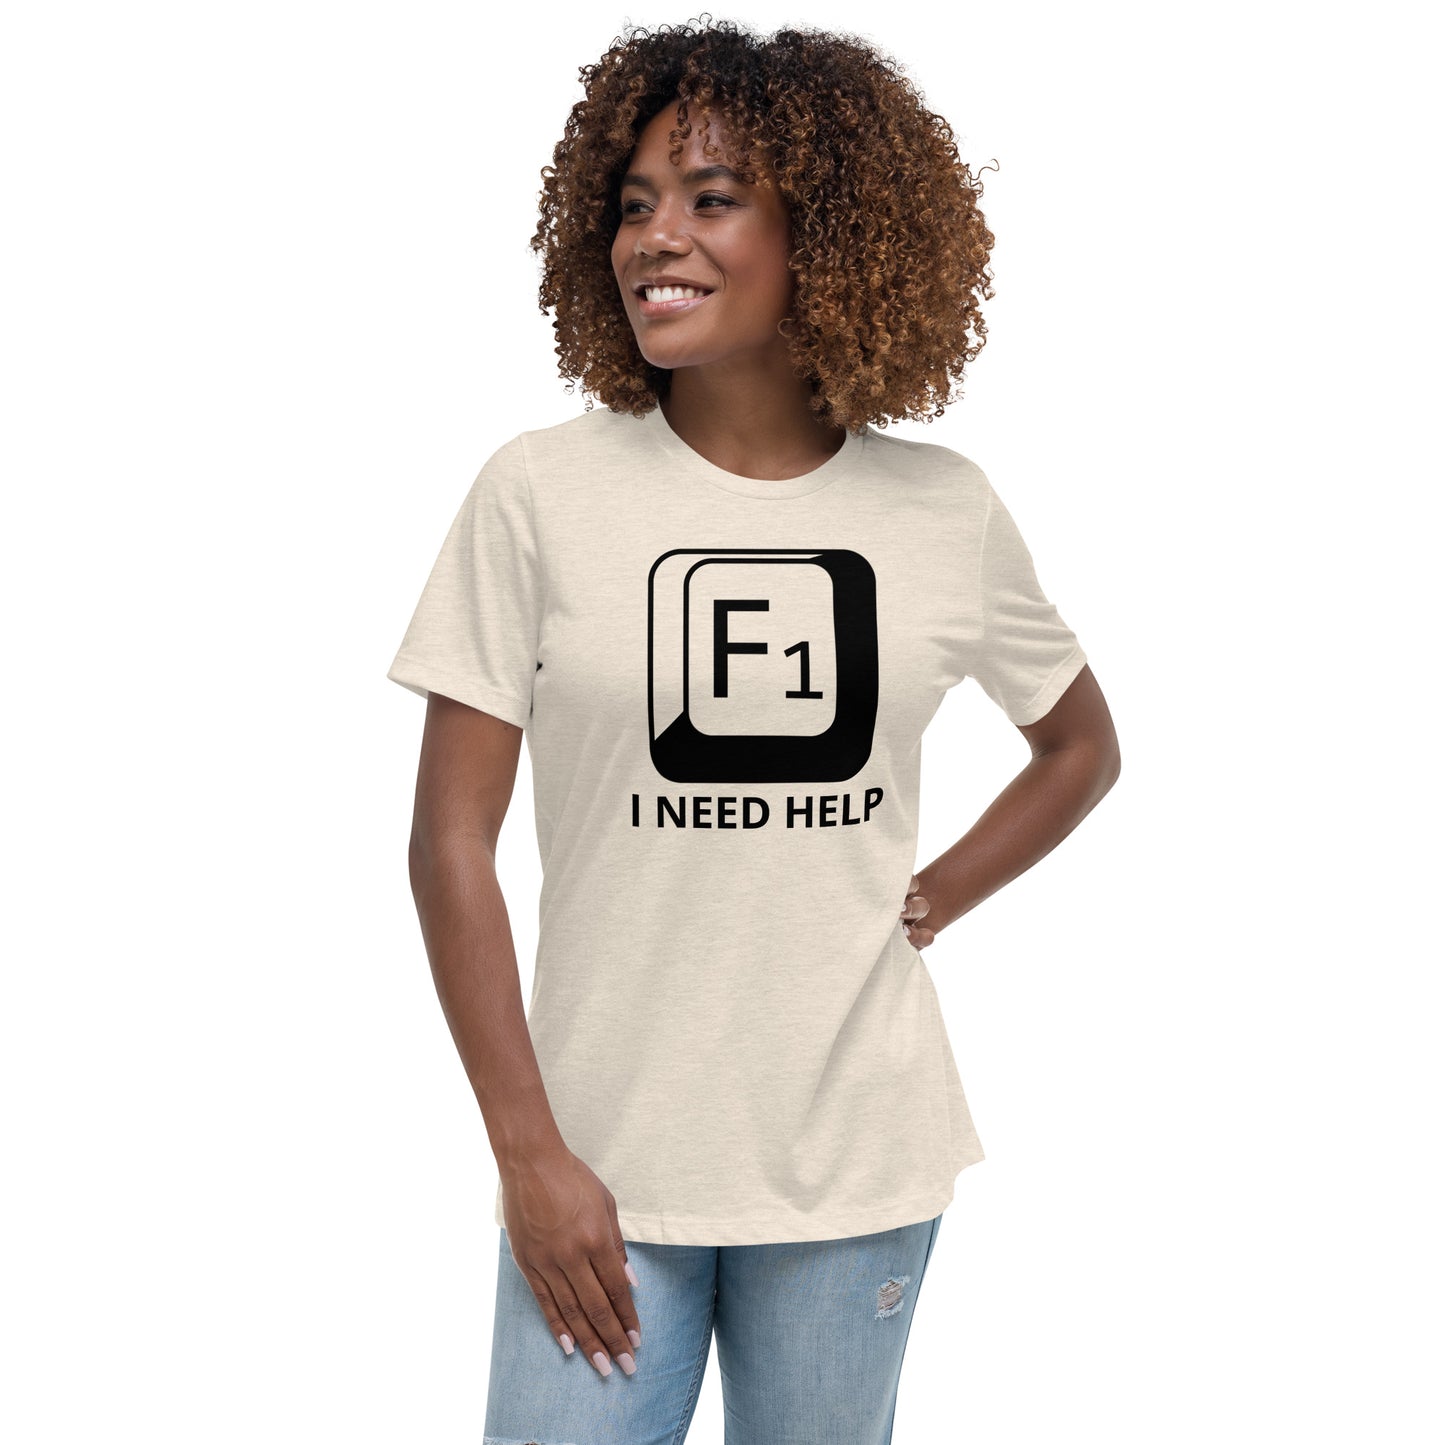 Woman with prism t-shirt with picture of "F1" key and text "I need help"